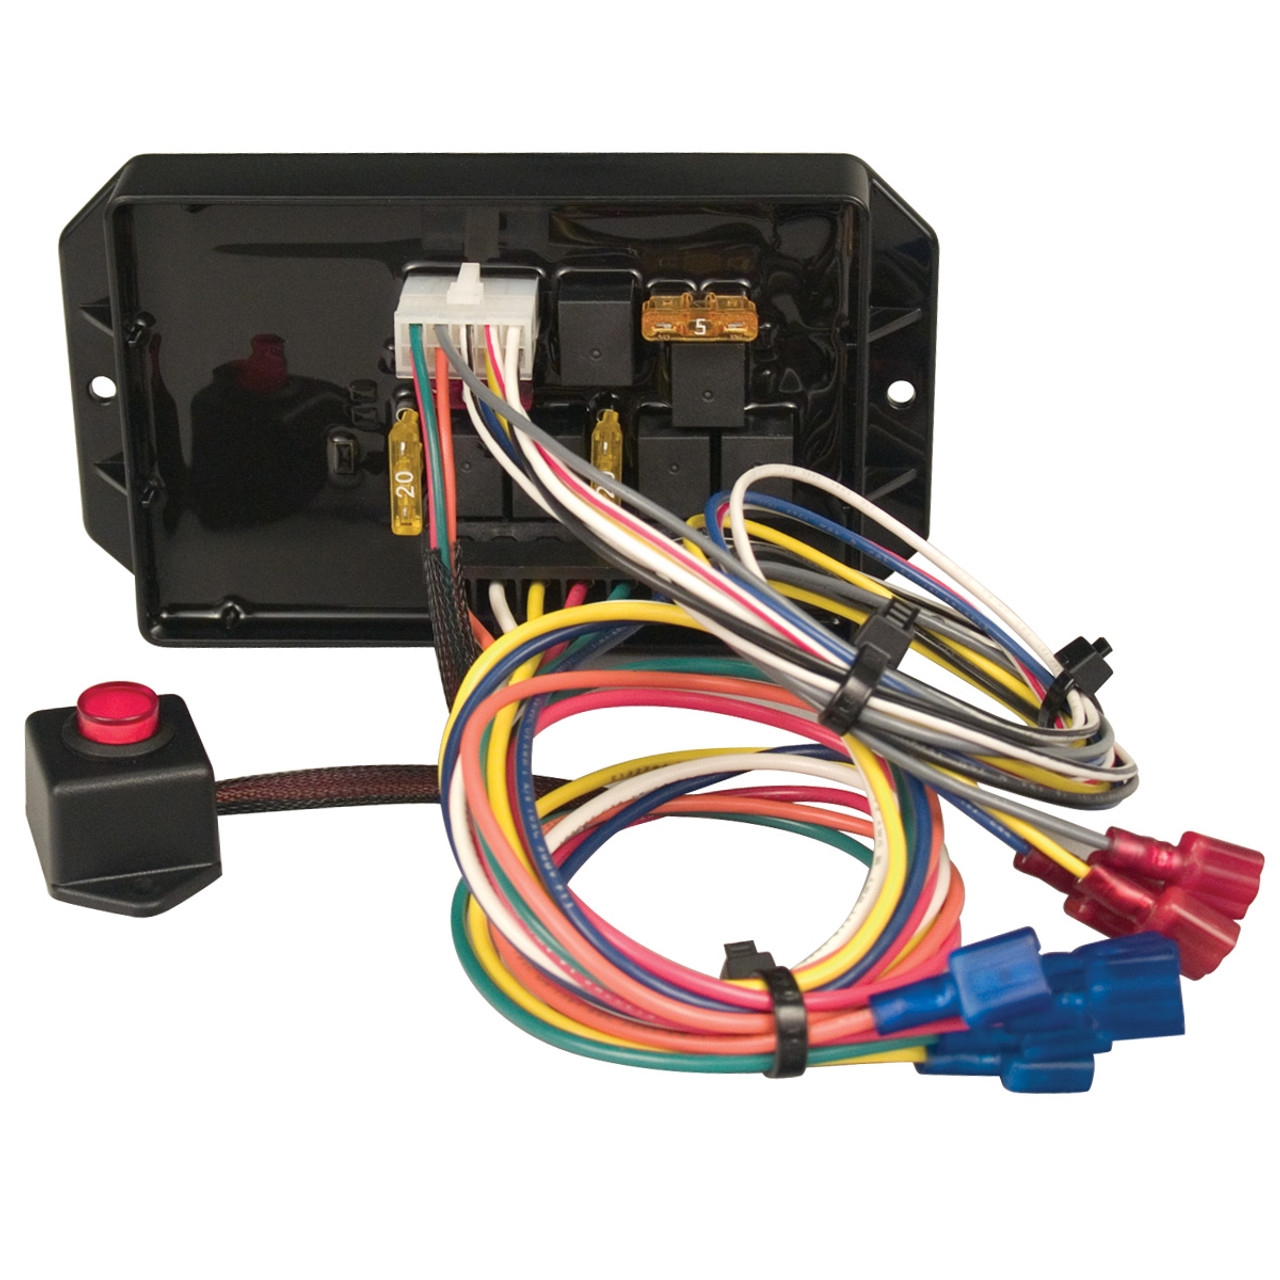 SoundOff Signal ETISSO-07+ Ignition Security Systems, available in Standard or Heavy Duty Model, Compatible with Many Different Types of Vehicles